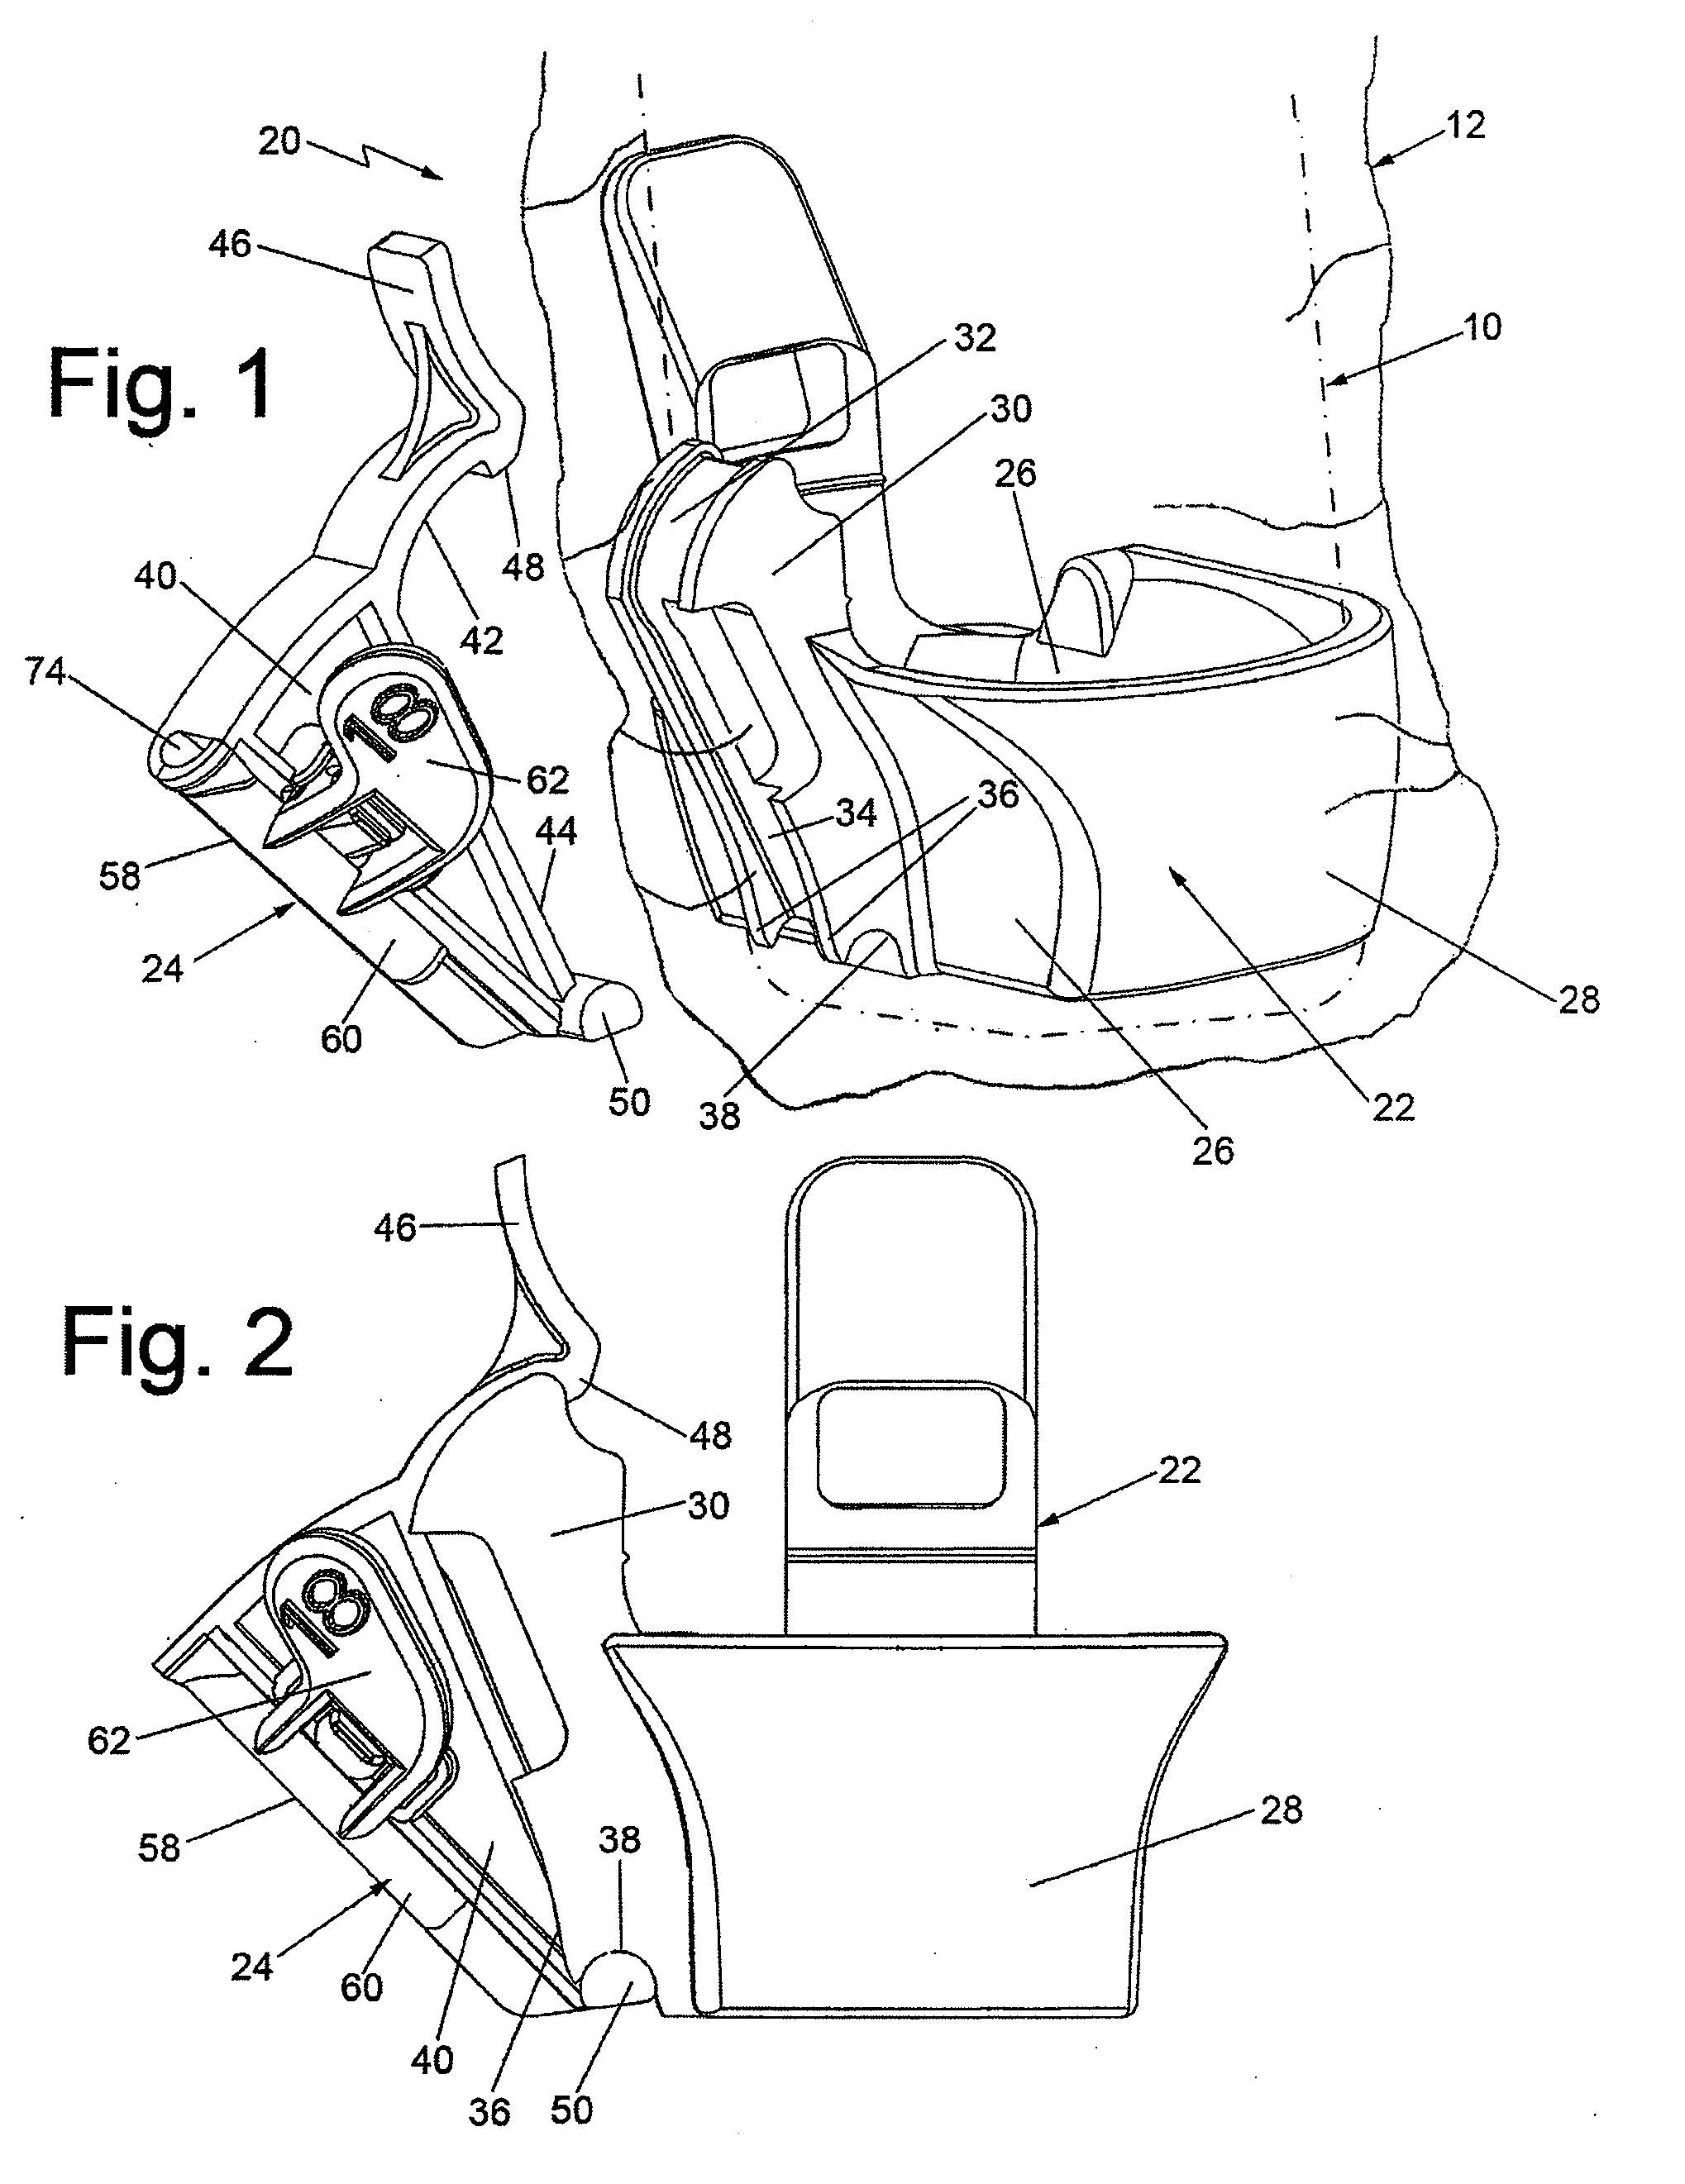 Needle guide system for use with ultrasound transducers to effect shallow path needle entry and method of use